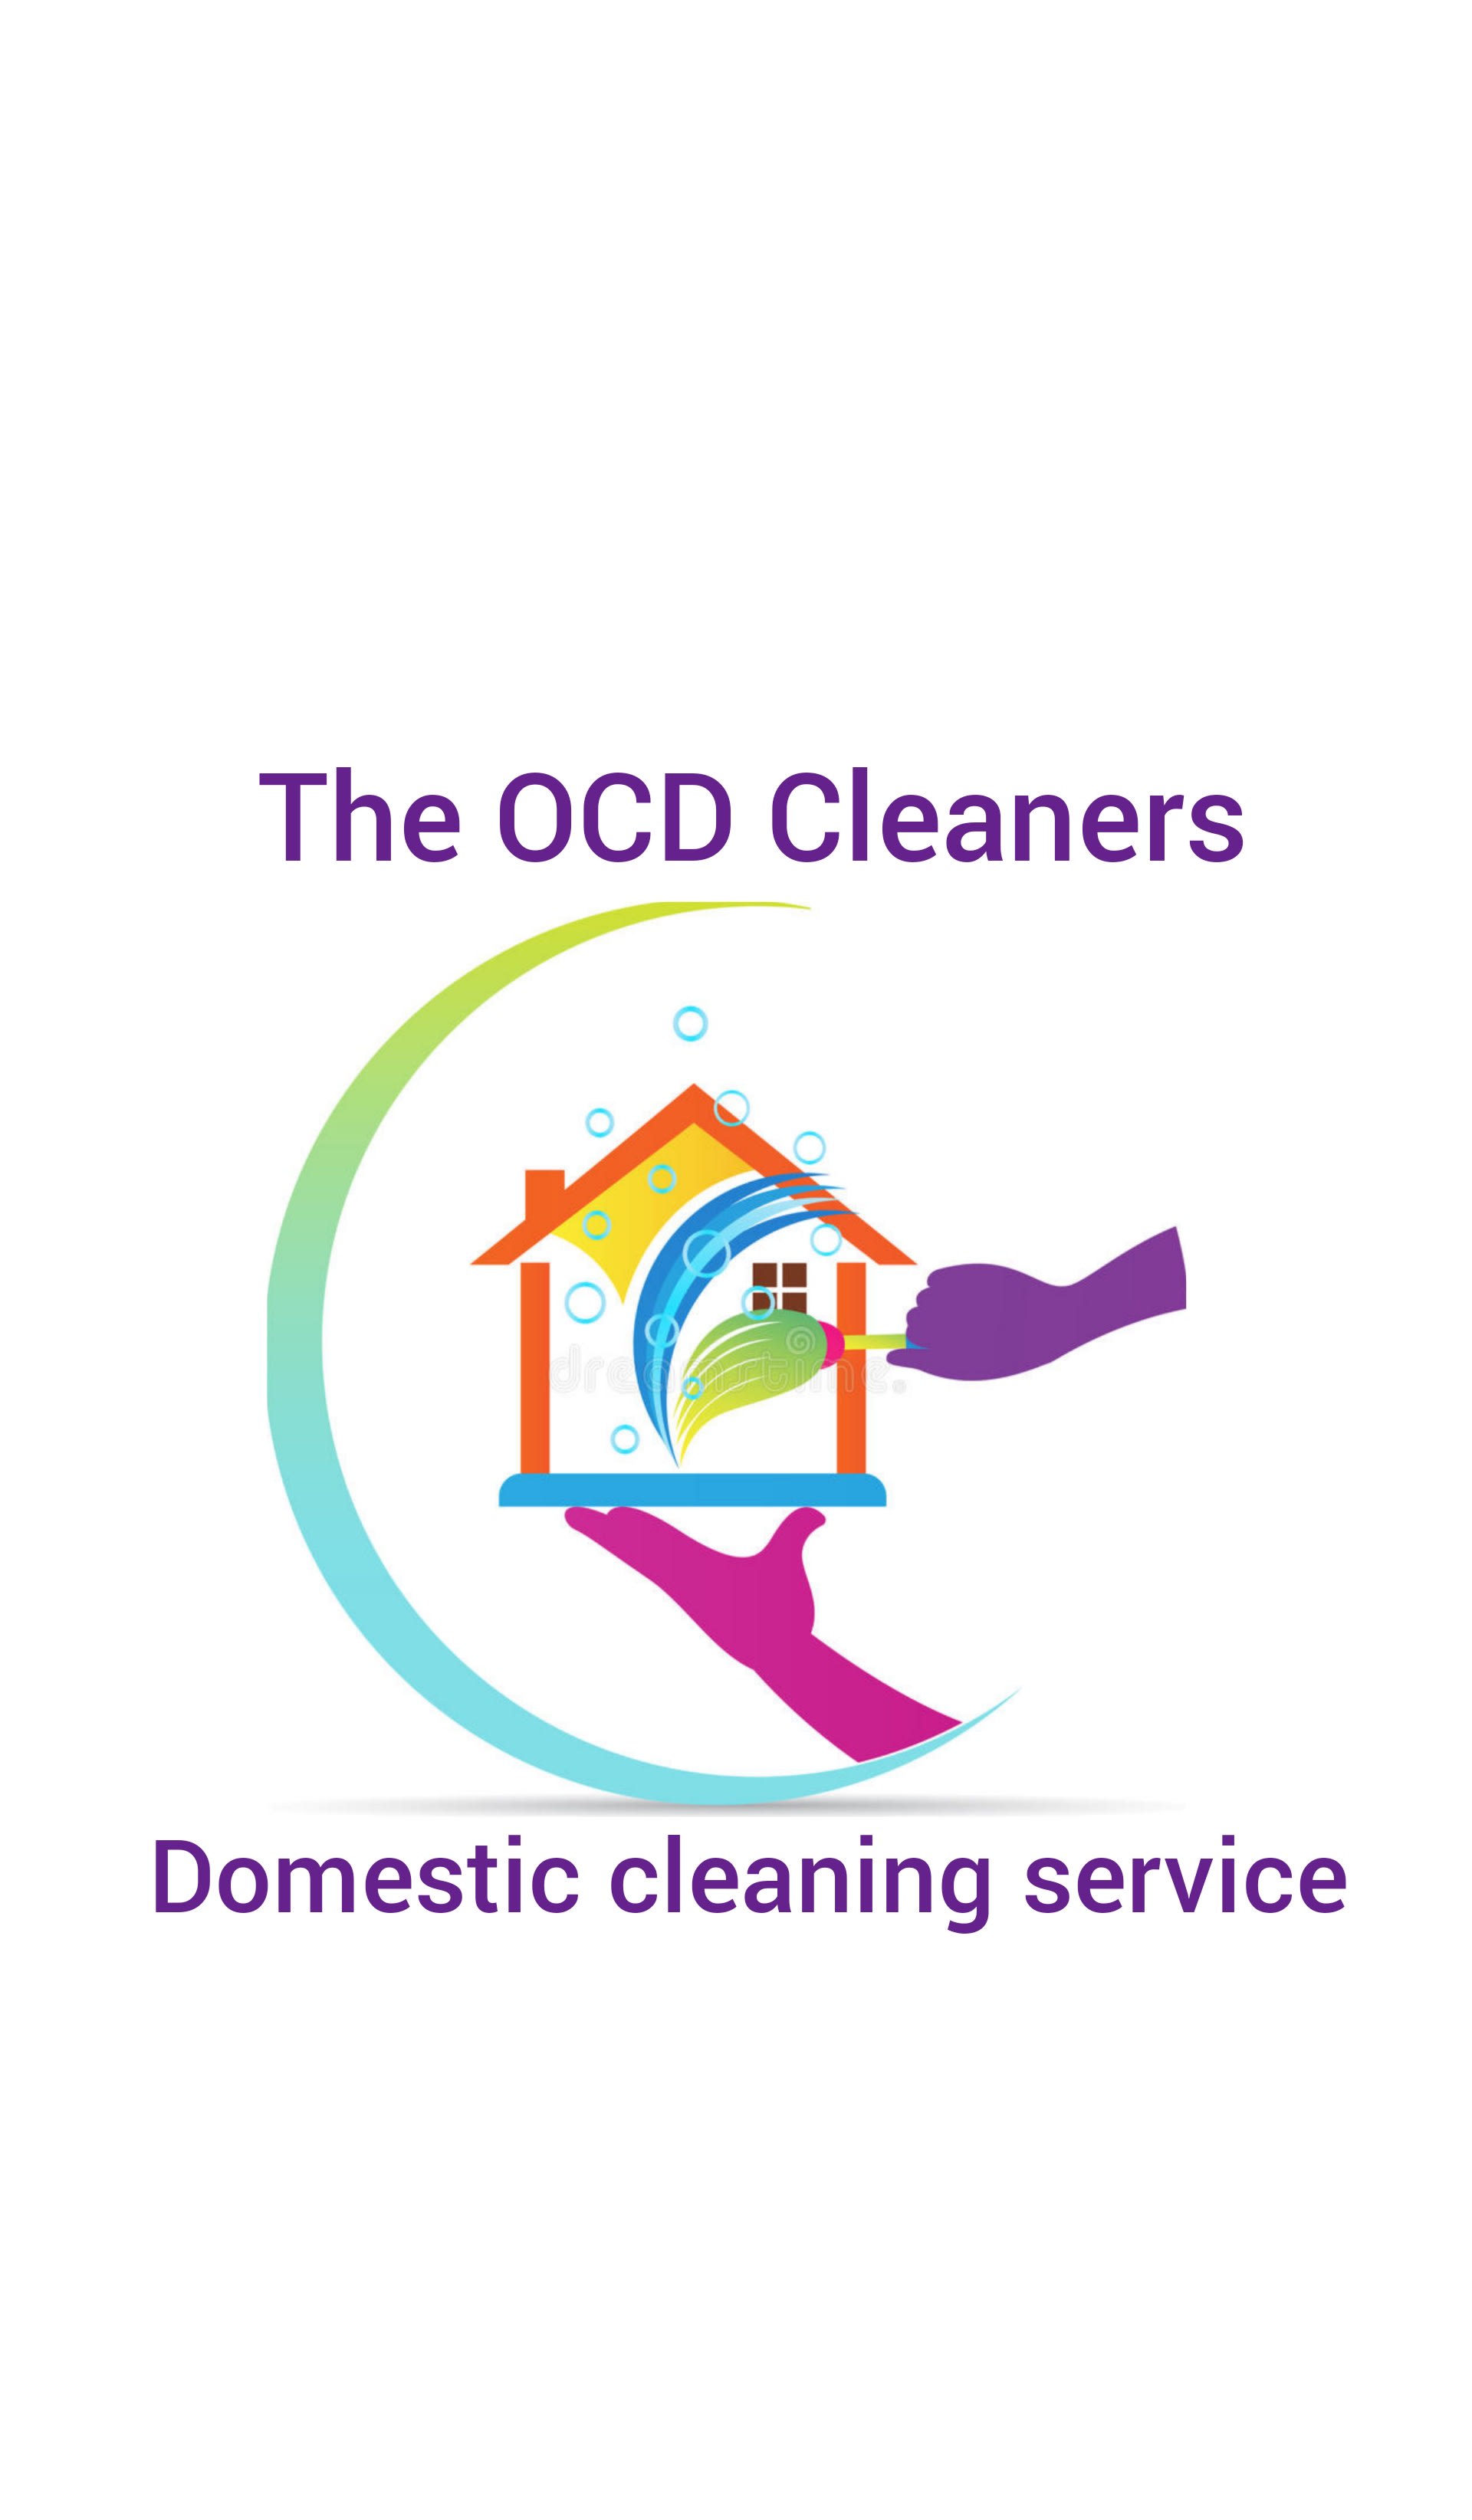 The OCD cleaners